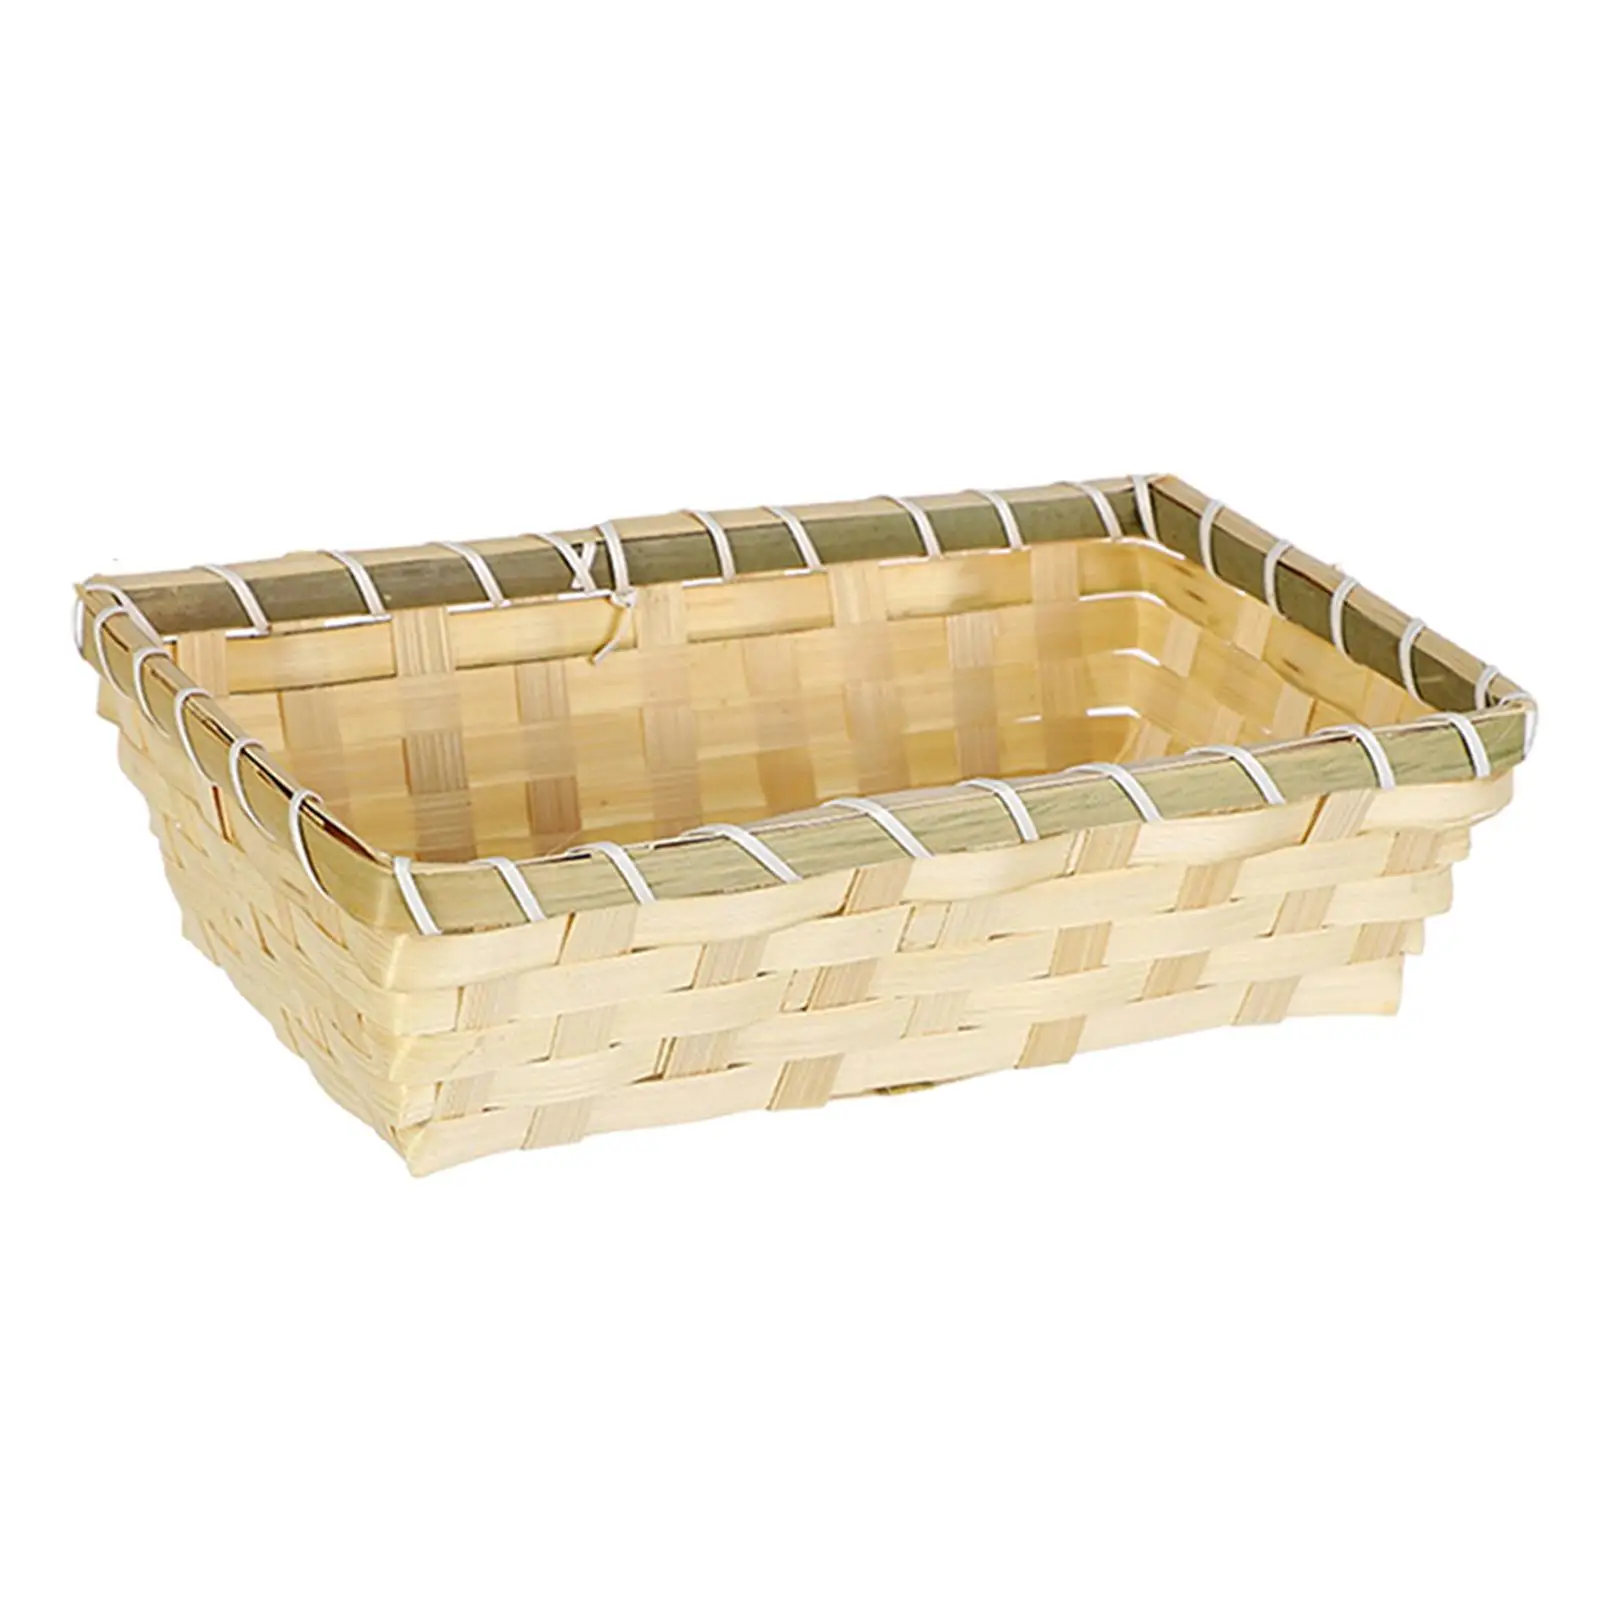 Bread Basket Woven Toy Snacks Hadewoven Food Serving Basket Storage Basket for Countertops Cabinets Laundry Room Bathroom Office